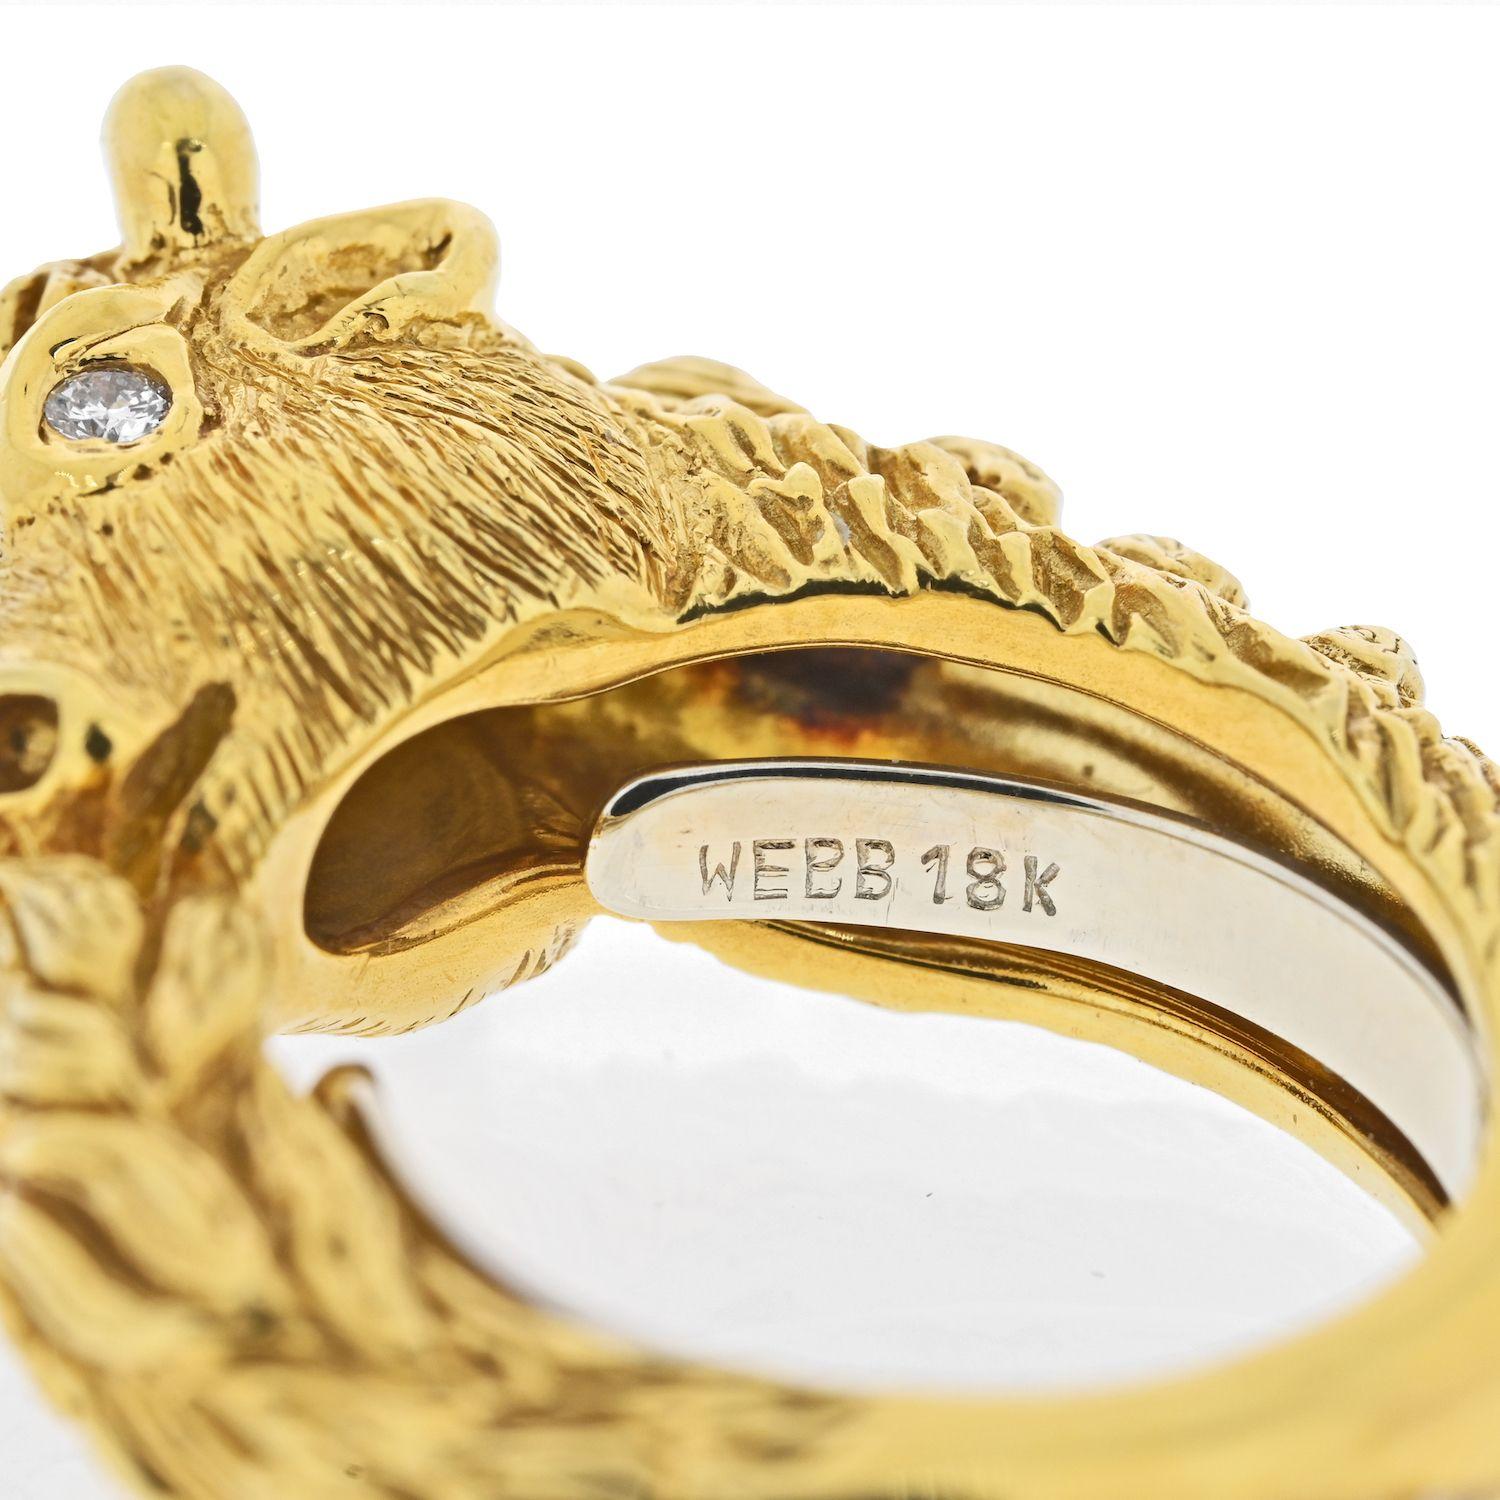 Lovely yellow gold ring from the Kingdom collection is designed in a shape of a bull by David Webb.
Crafted in 18K yellow gold; set with round brilliant-cut diamond eyes; measures 1/2 inch at widest section, 1/2 inch height; ring size approximately